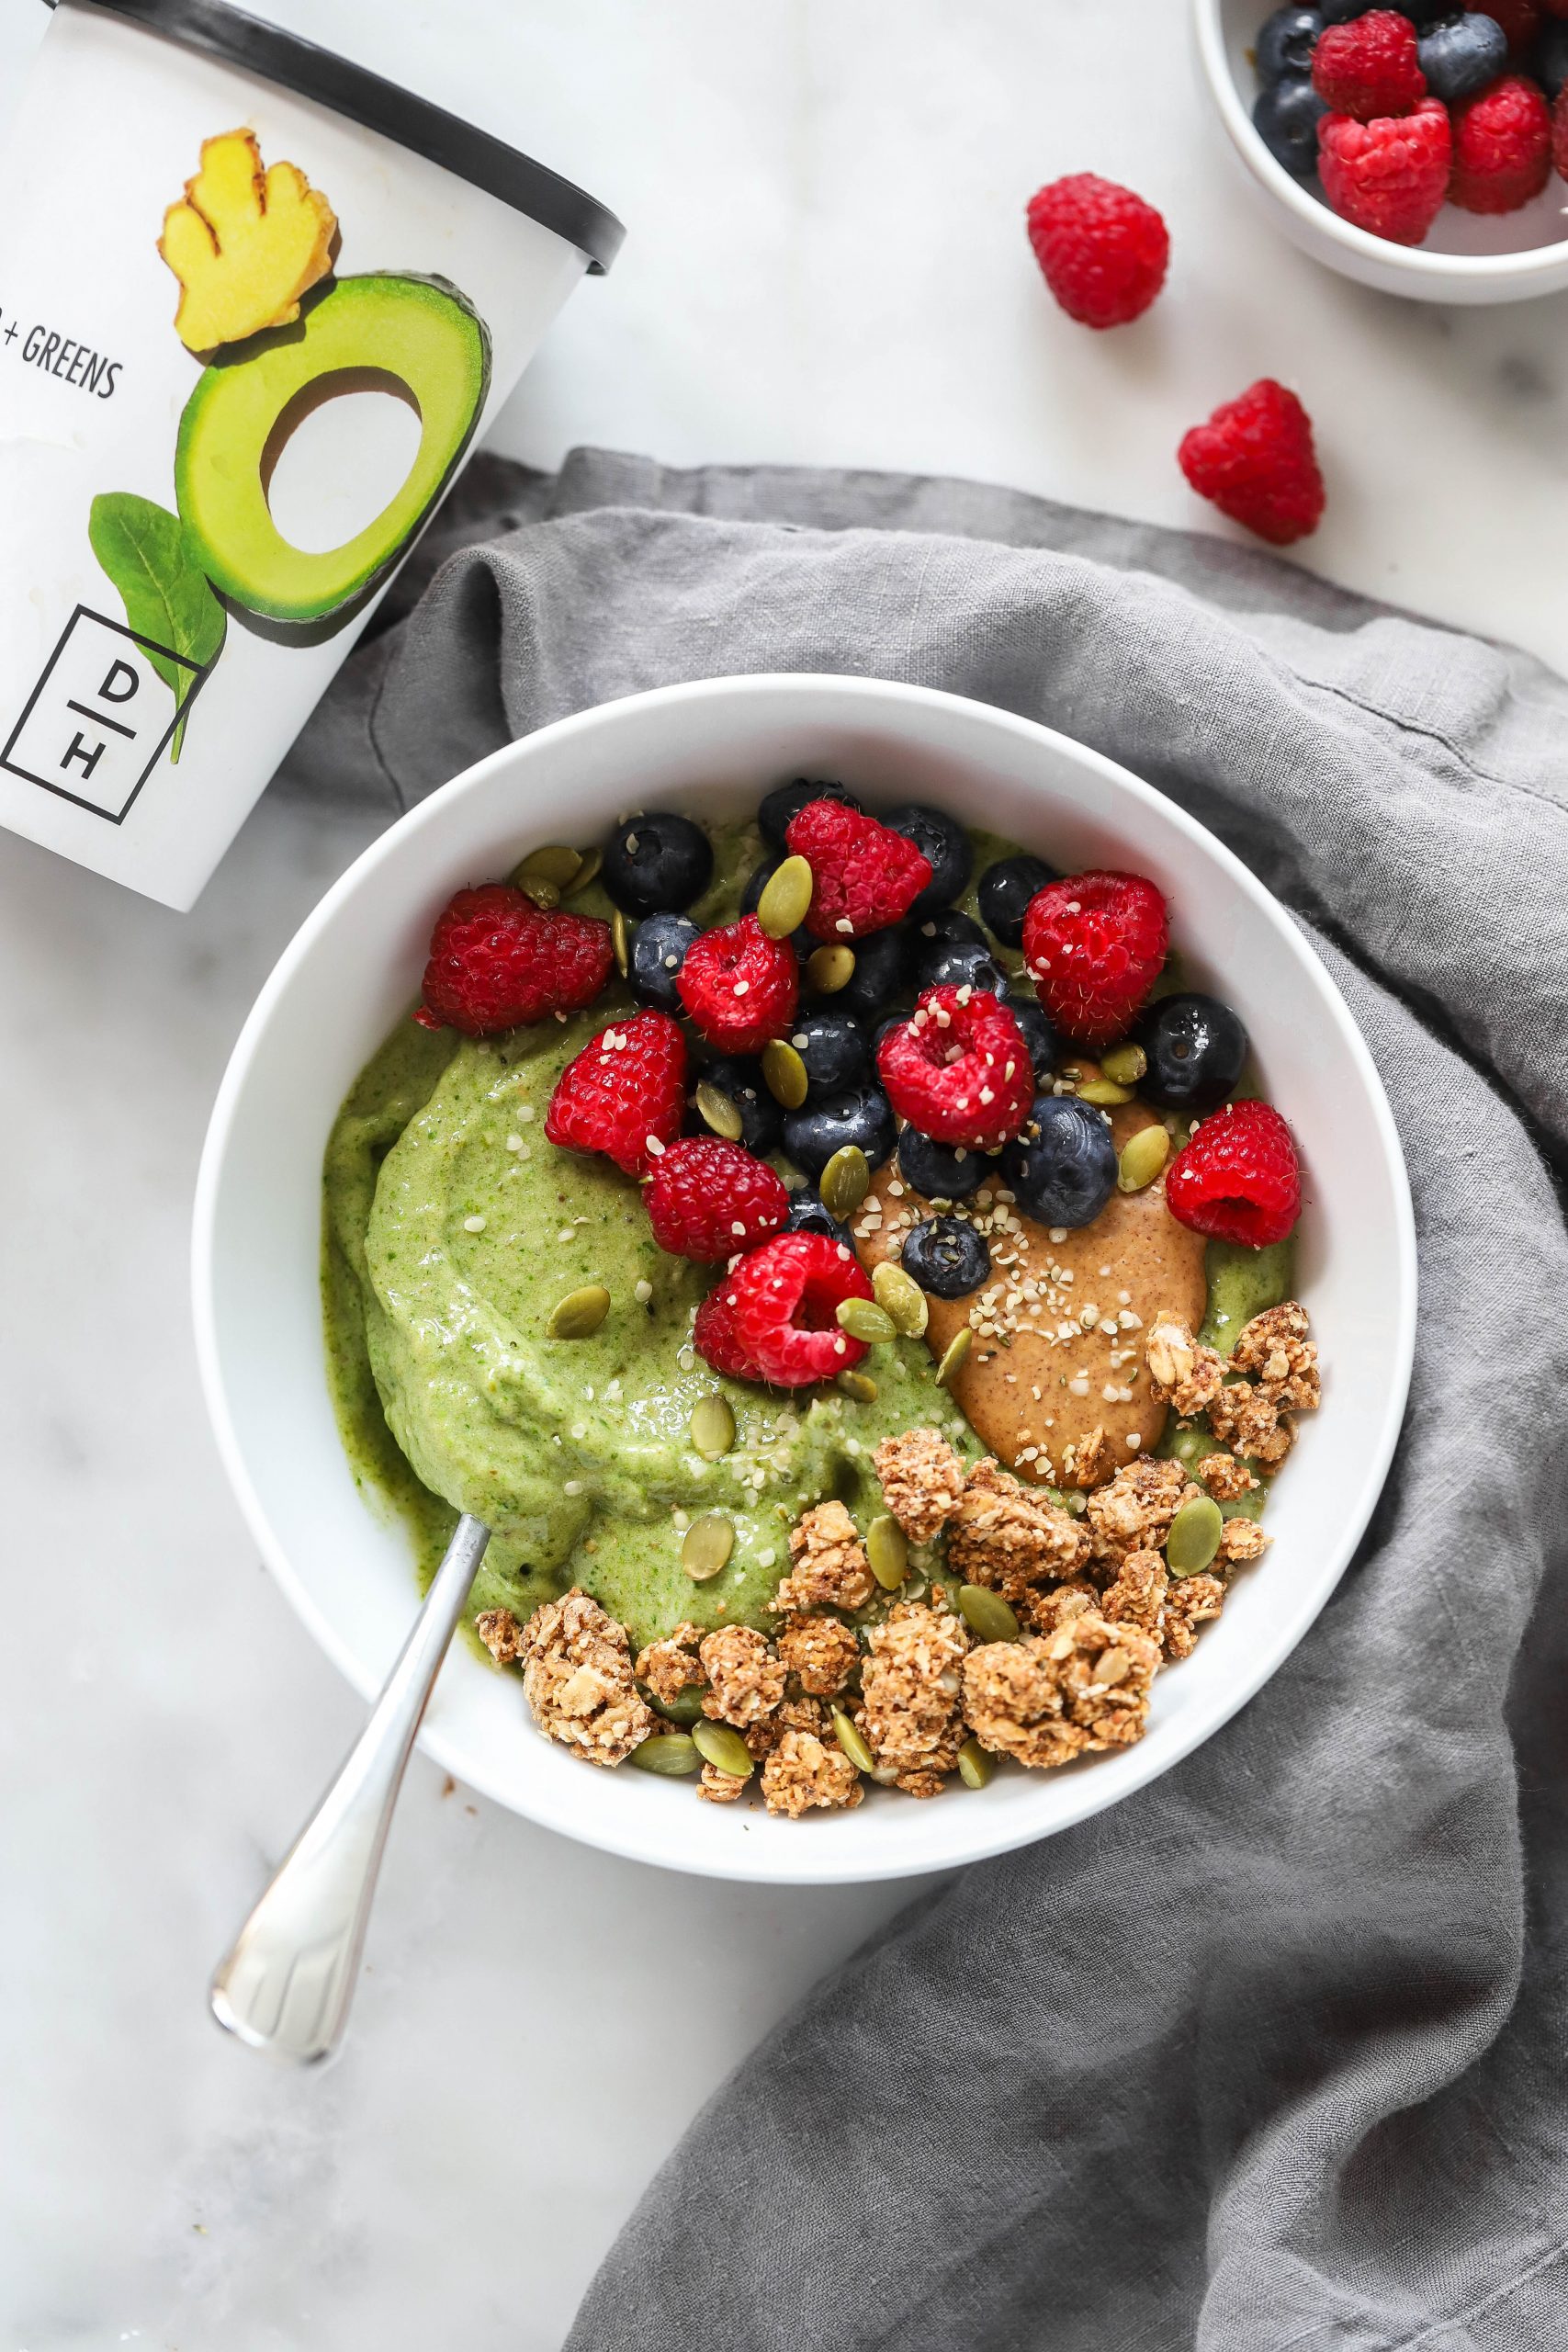 green smoothie bowl topped with berries, nut butter, and granola.